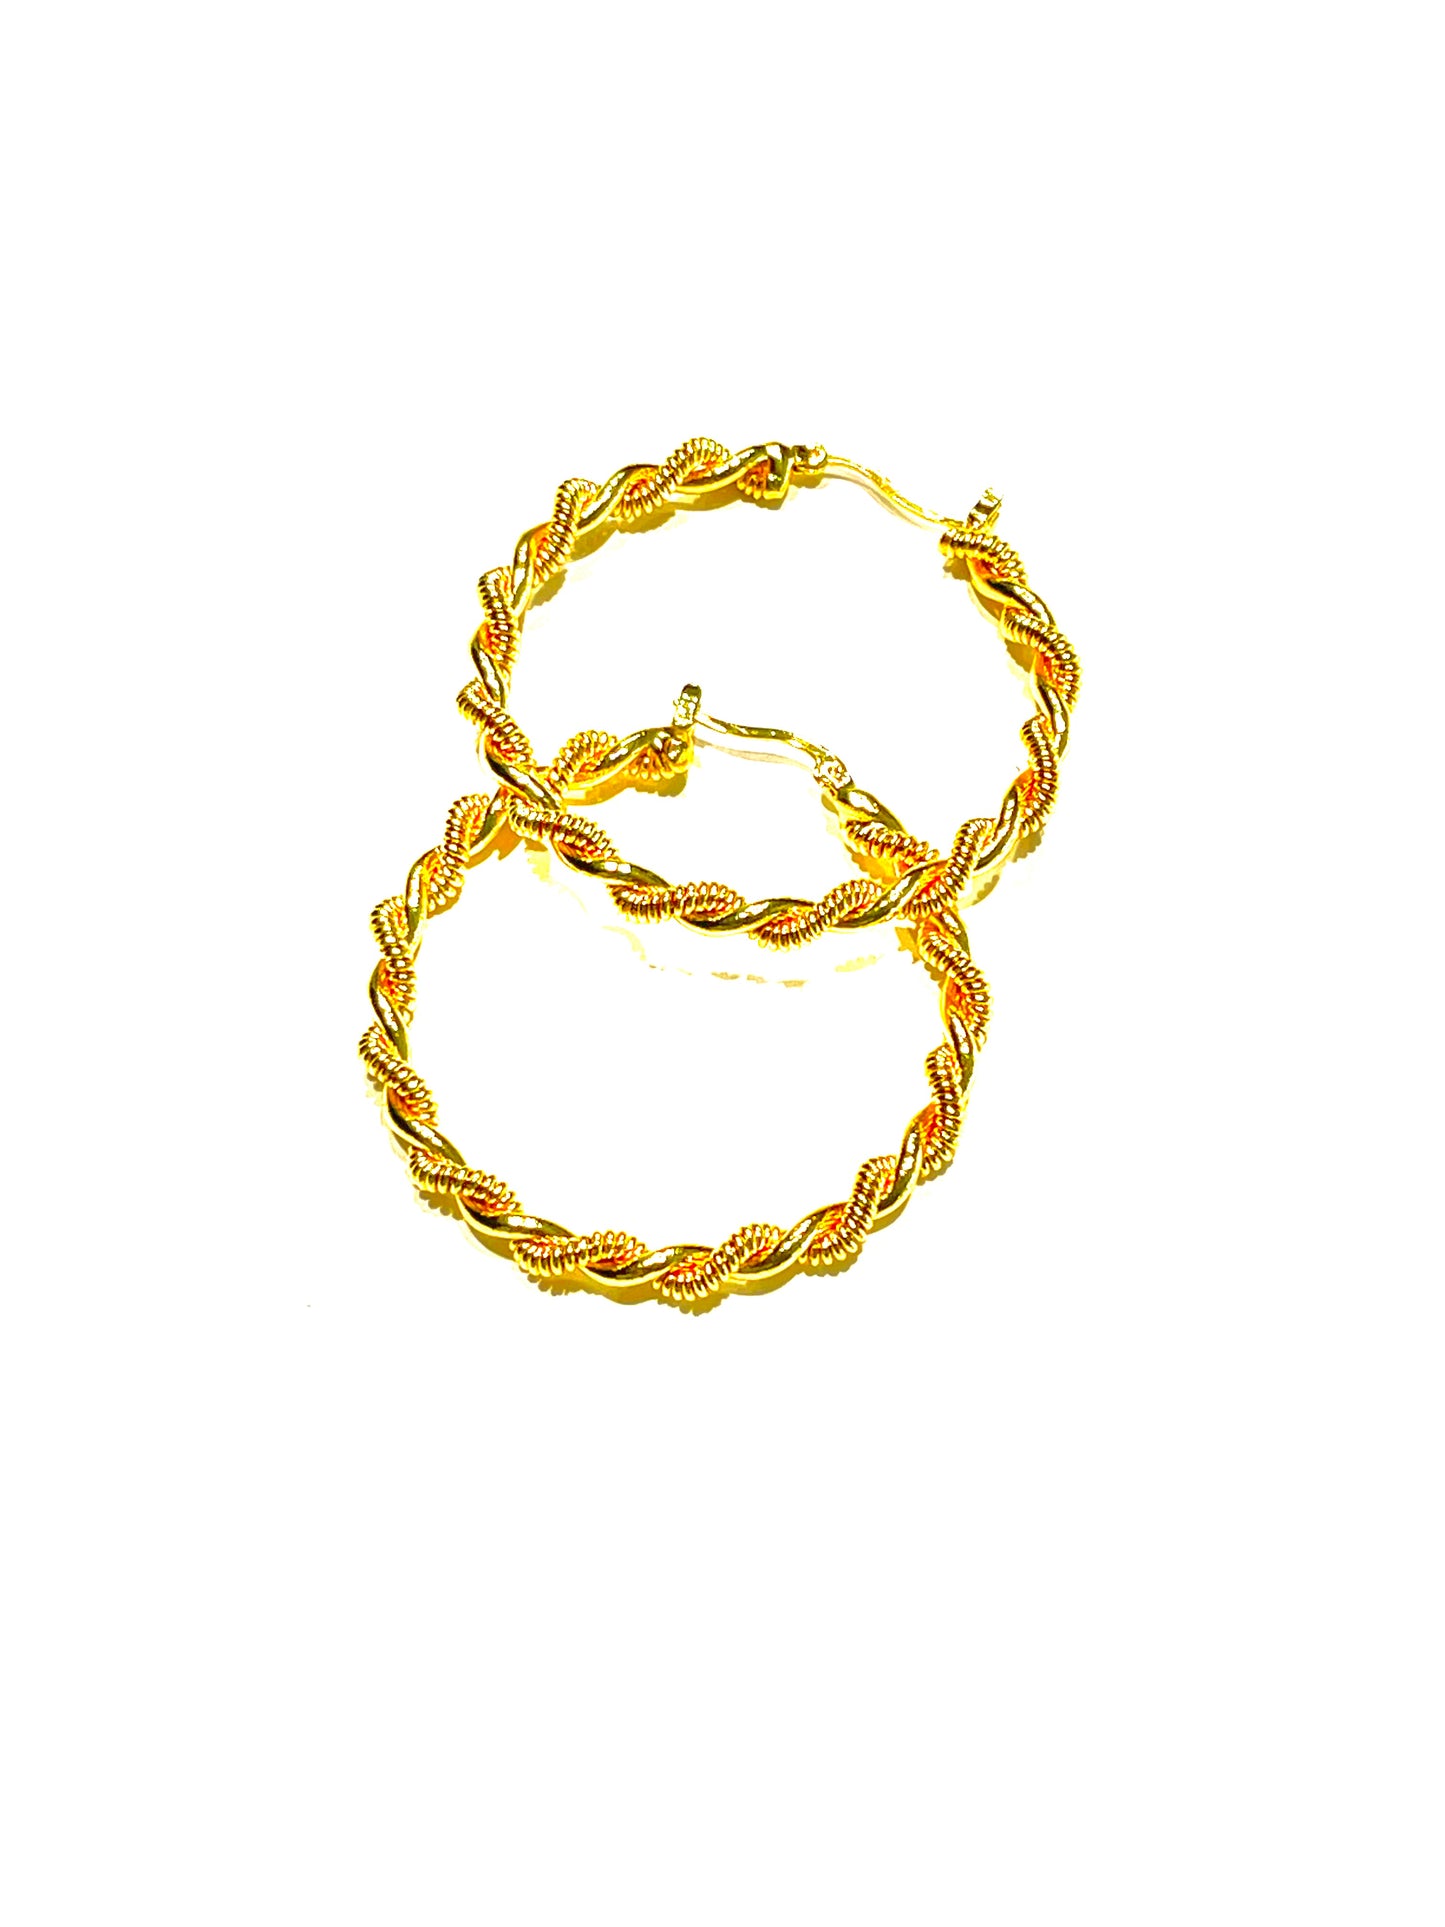 Twisted Rope Design Gold Statement Hoops 2"